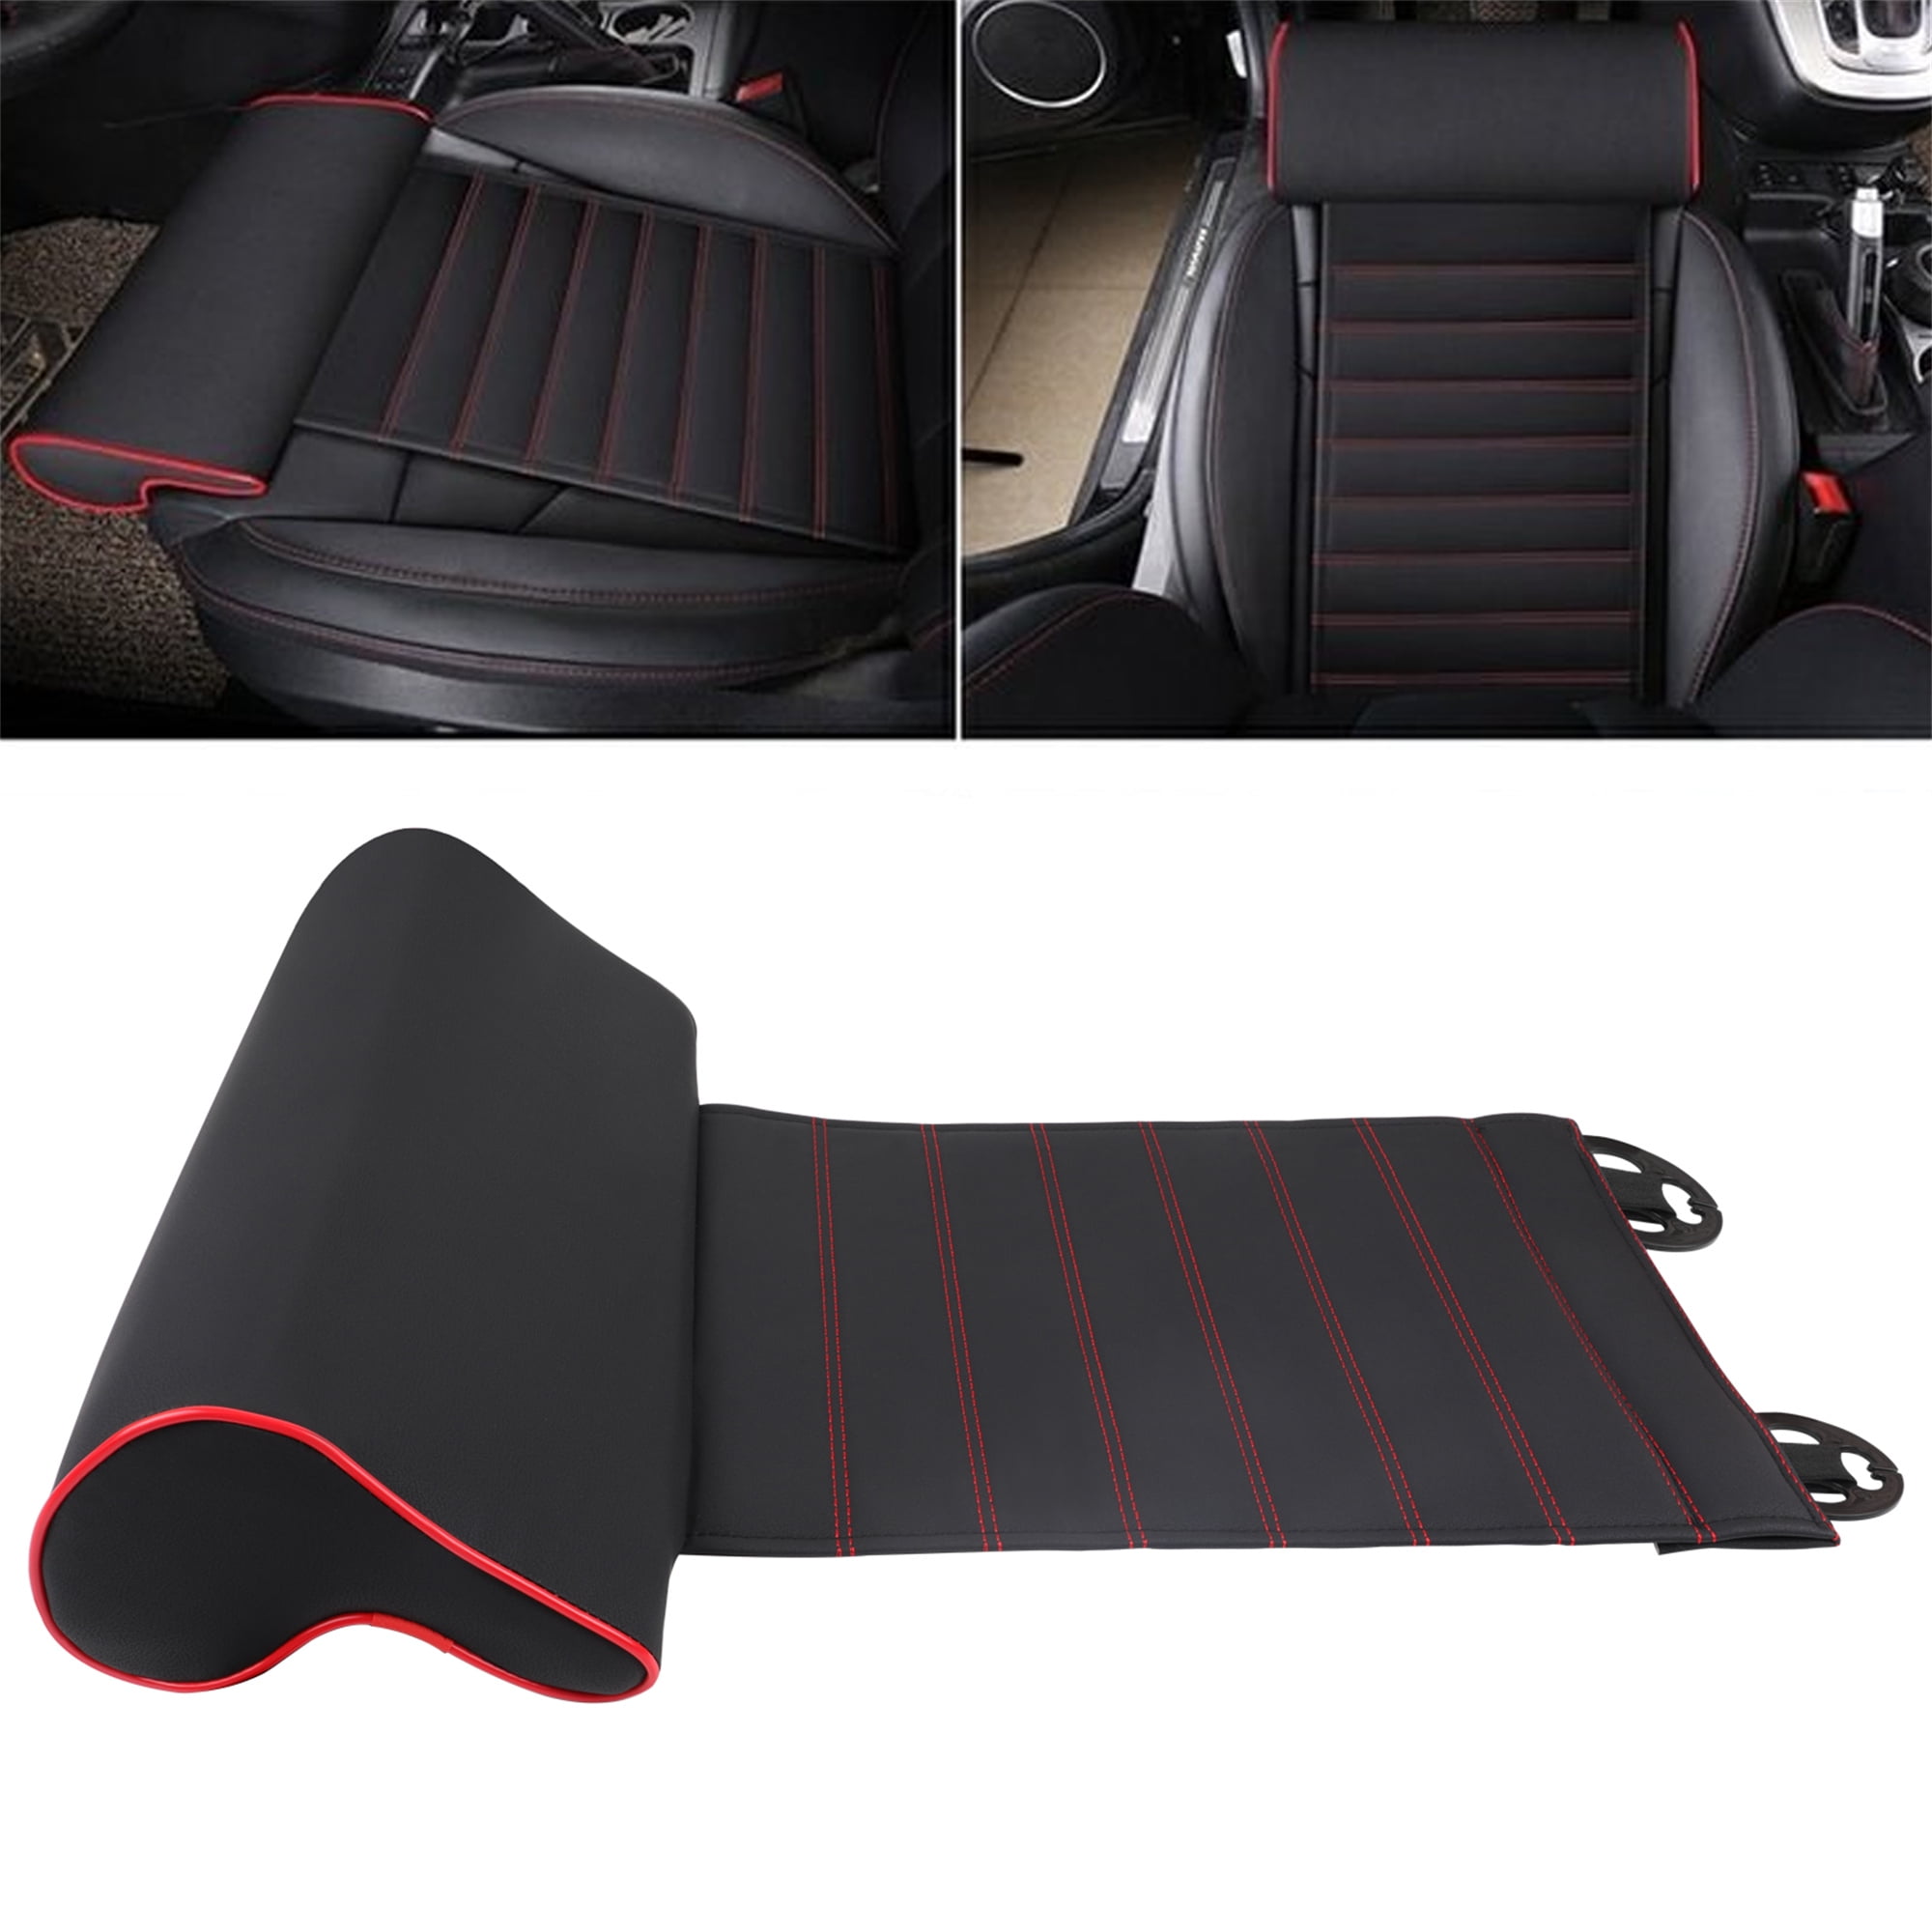  Car Knee Cushion Pads, High-density Memory Foam, For Comfort  and Pain Relief while Driving (Black, Set of 2) : Automotive